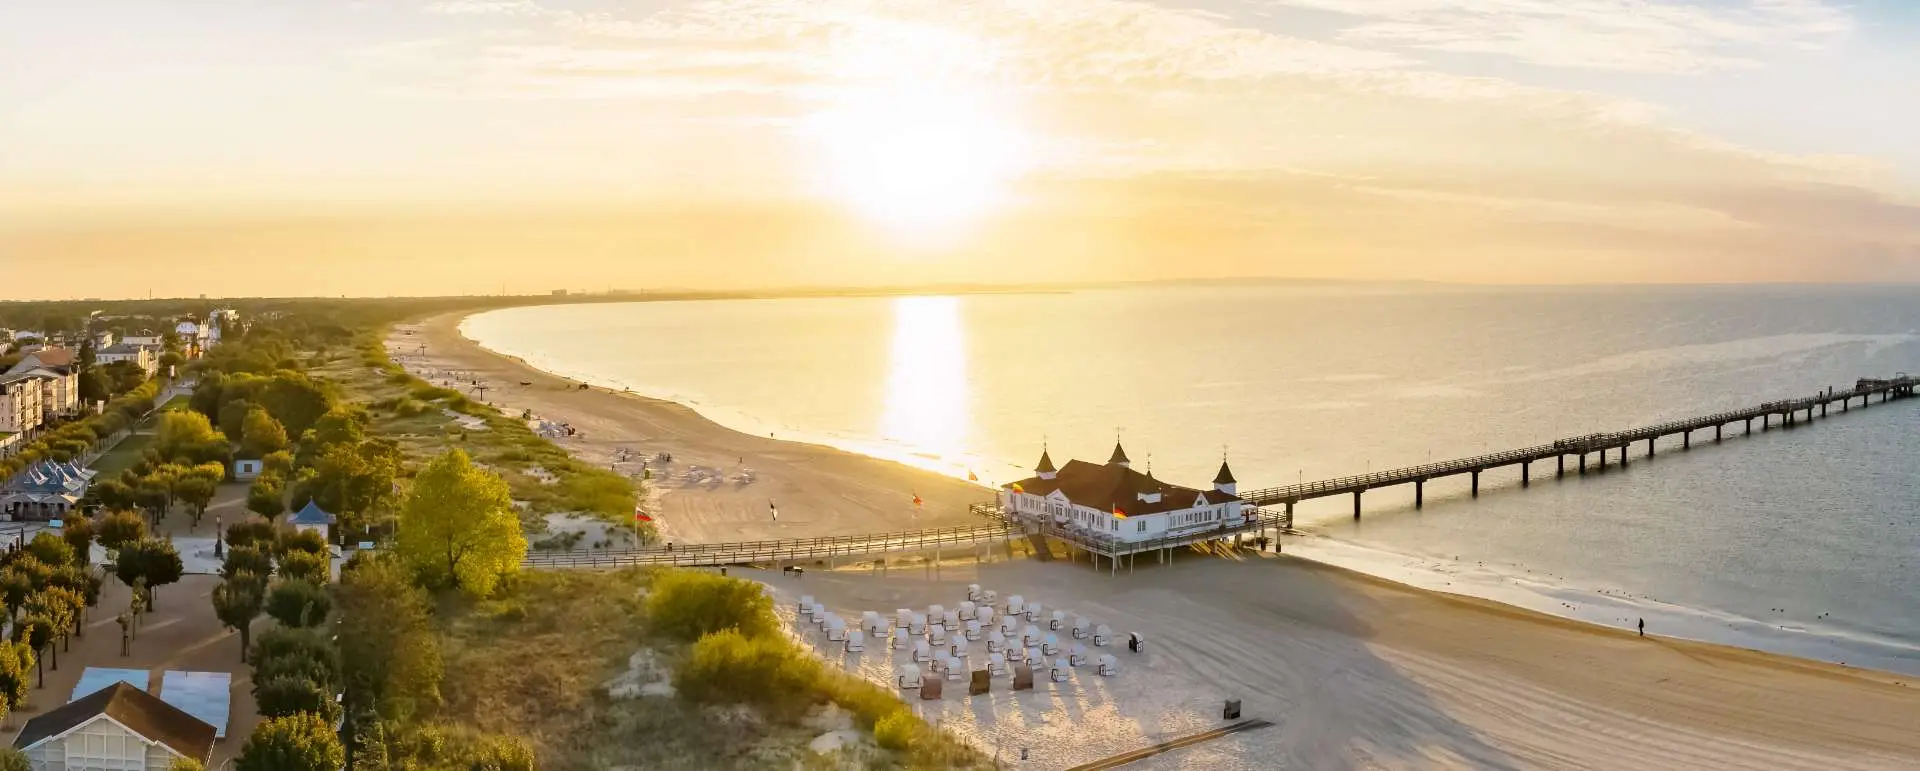 Usedom - the perfect destination for school class city trips